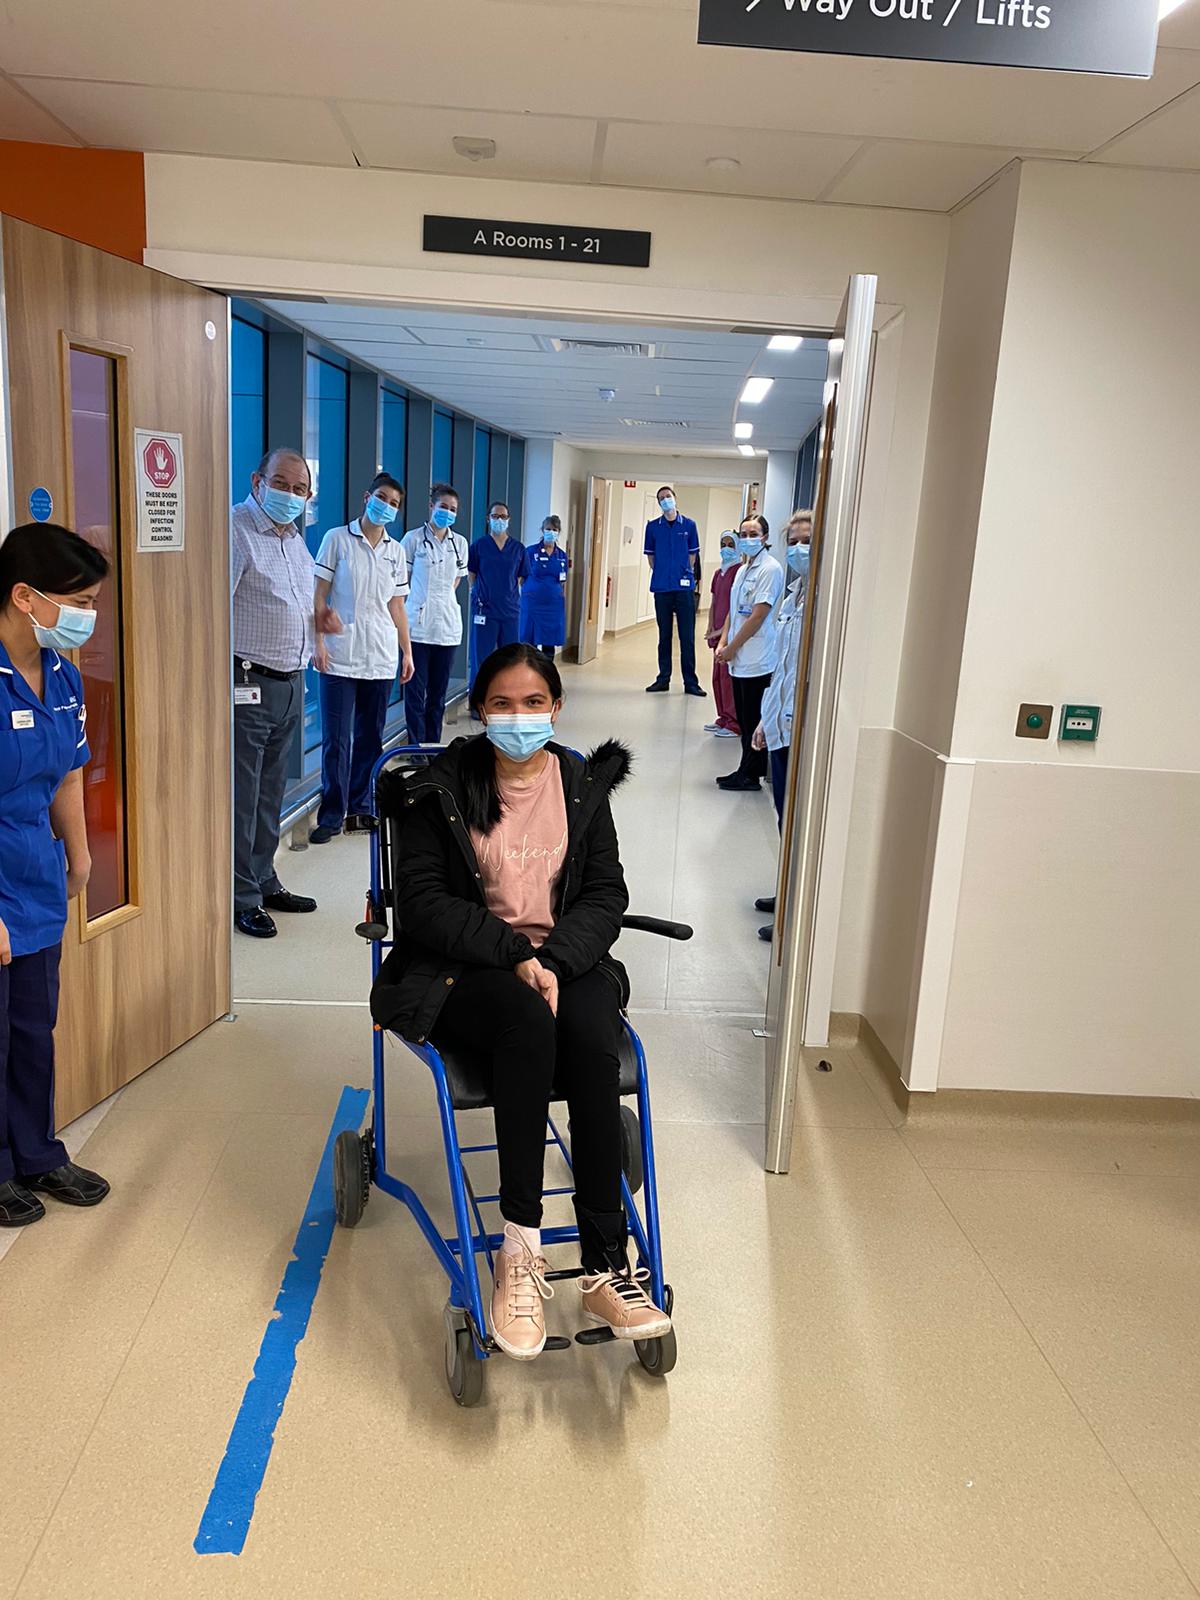 NHS Eva Gicain, 30, was discharged from hospital in January 2021 after fighting Covid-19. She has no memory of giving birth while seriously ill. (Royal Papworth Hospital/ PA)